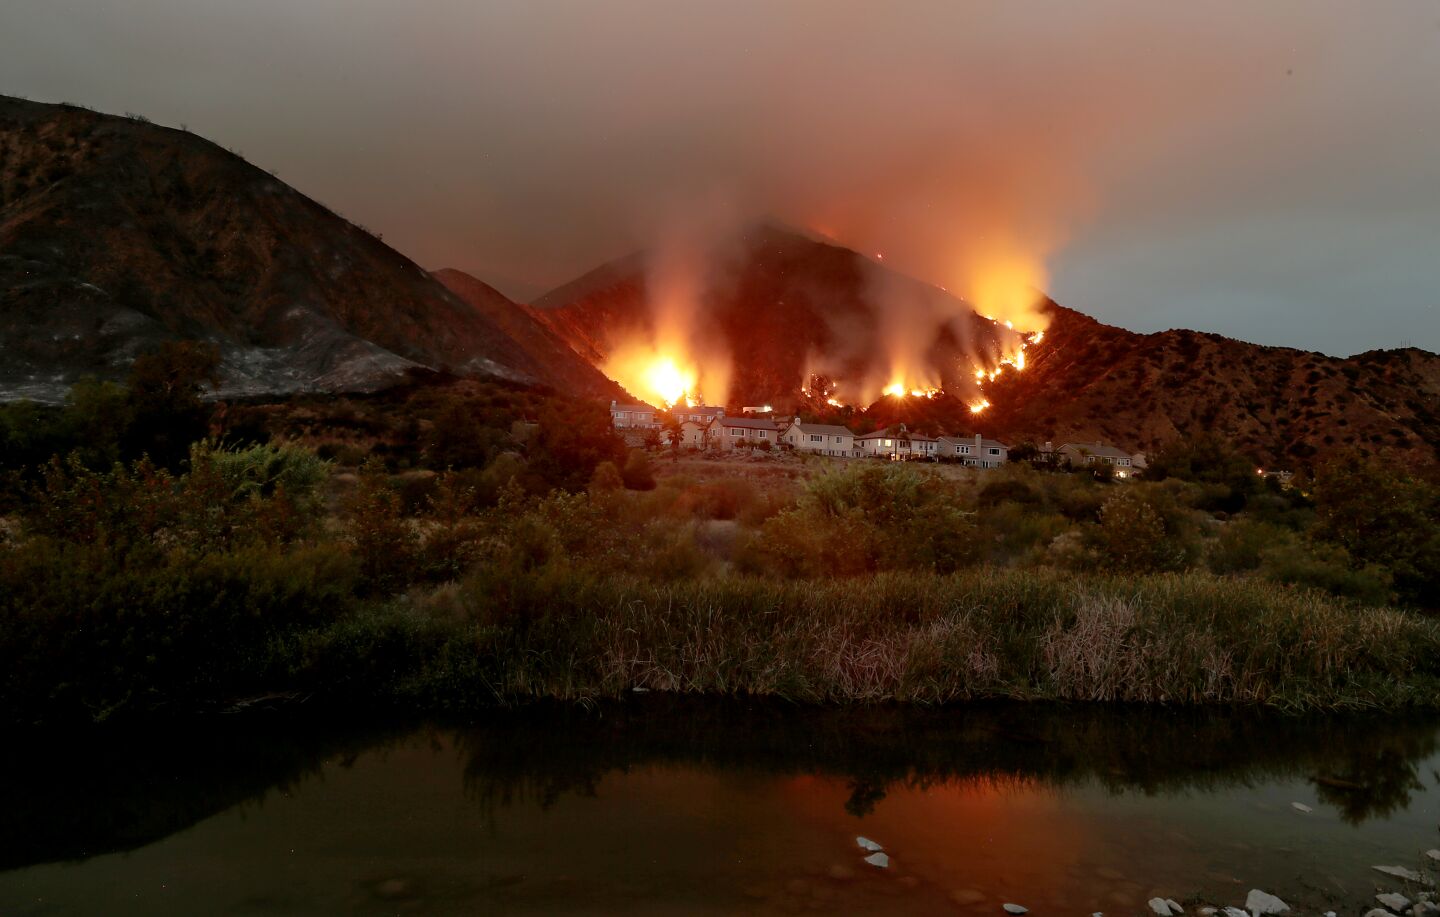 The Ranch fire burns in the hills above a cluster of homes along the San Gabriel River near Azusa on Thursday.